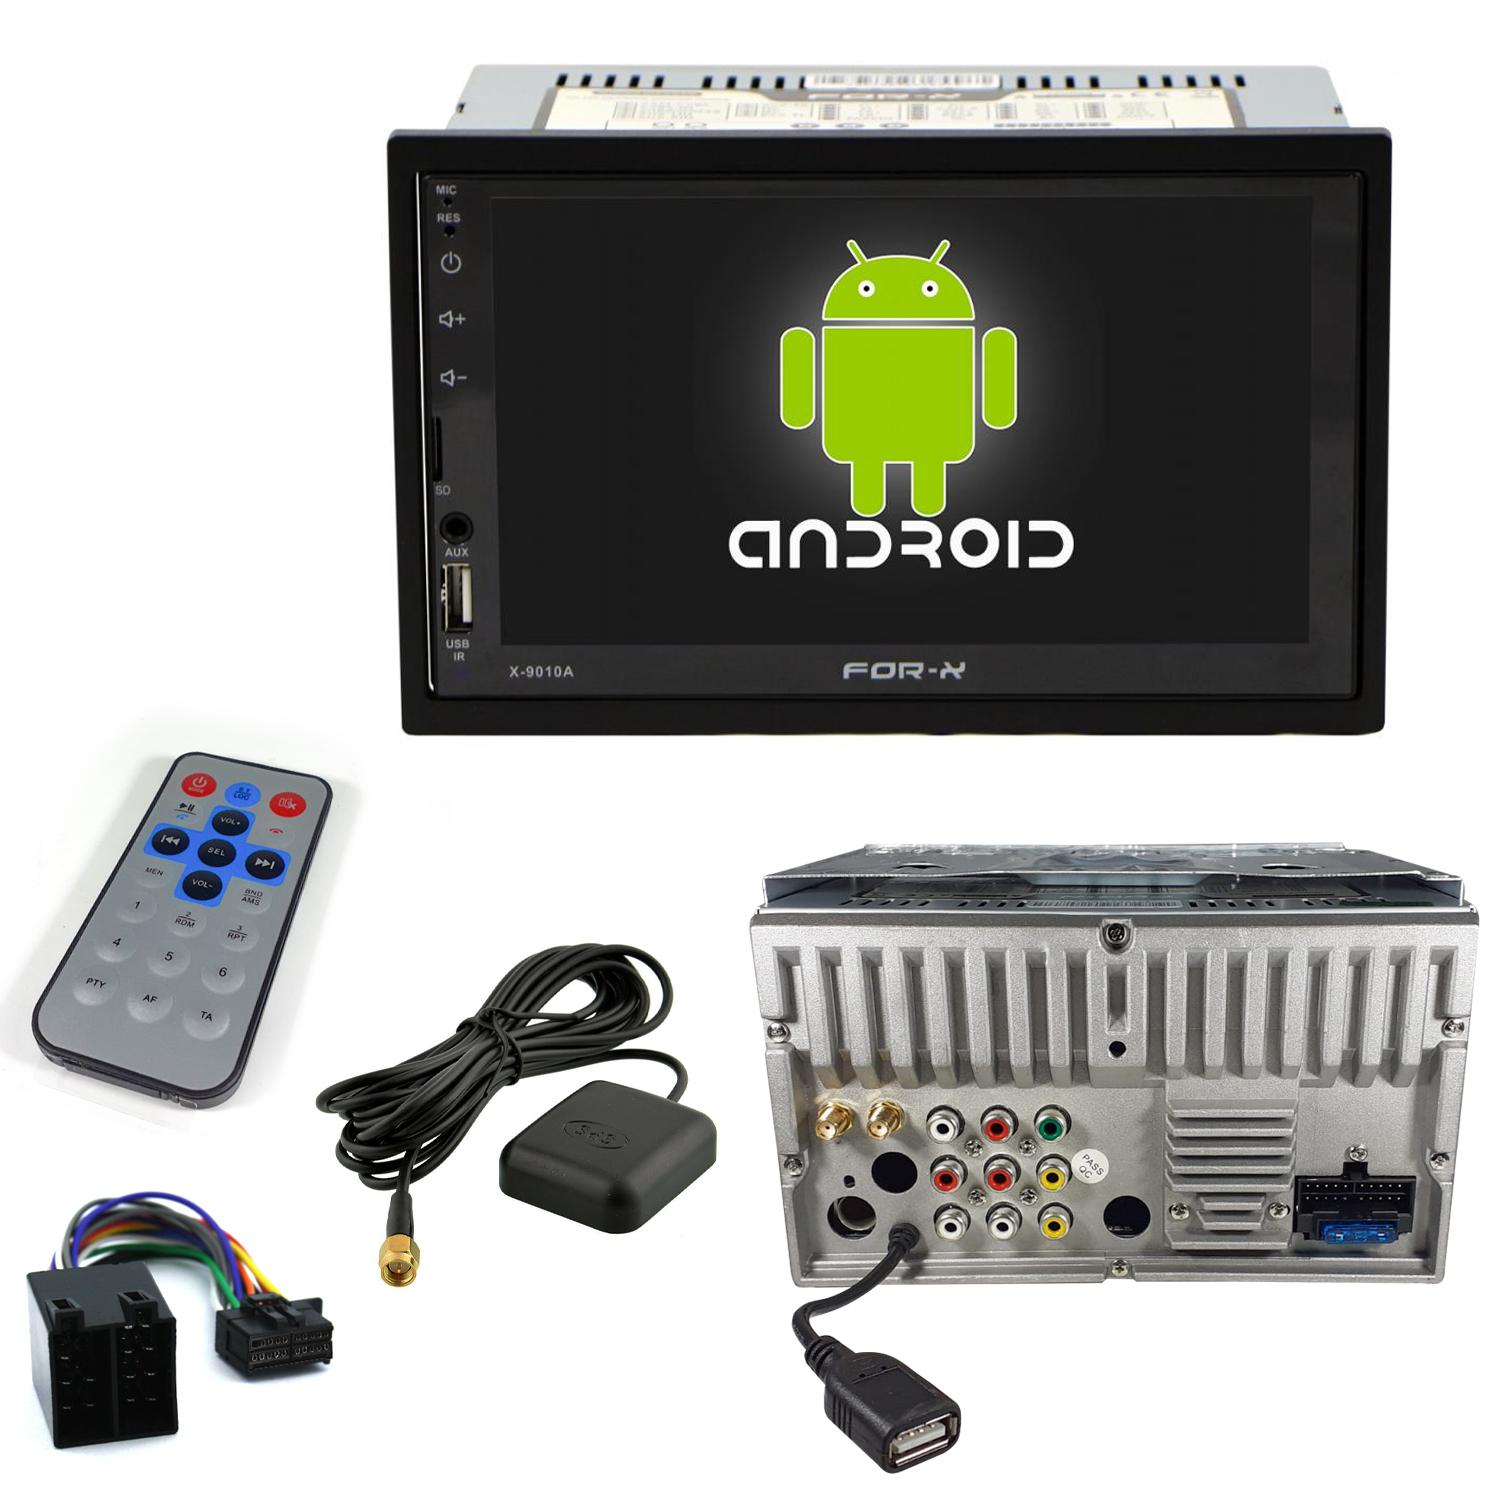 DOUBLE TEYP 7 4X50W ANDROID MİRRORLİNK BT/USB/SD/FM/AUX FOR-X X-9010A